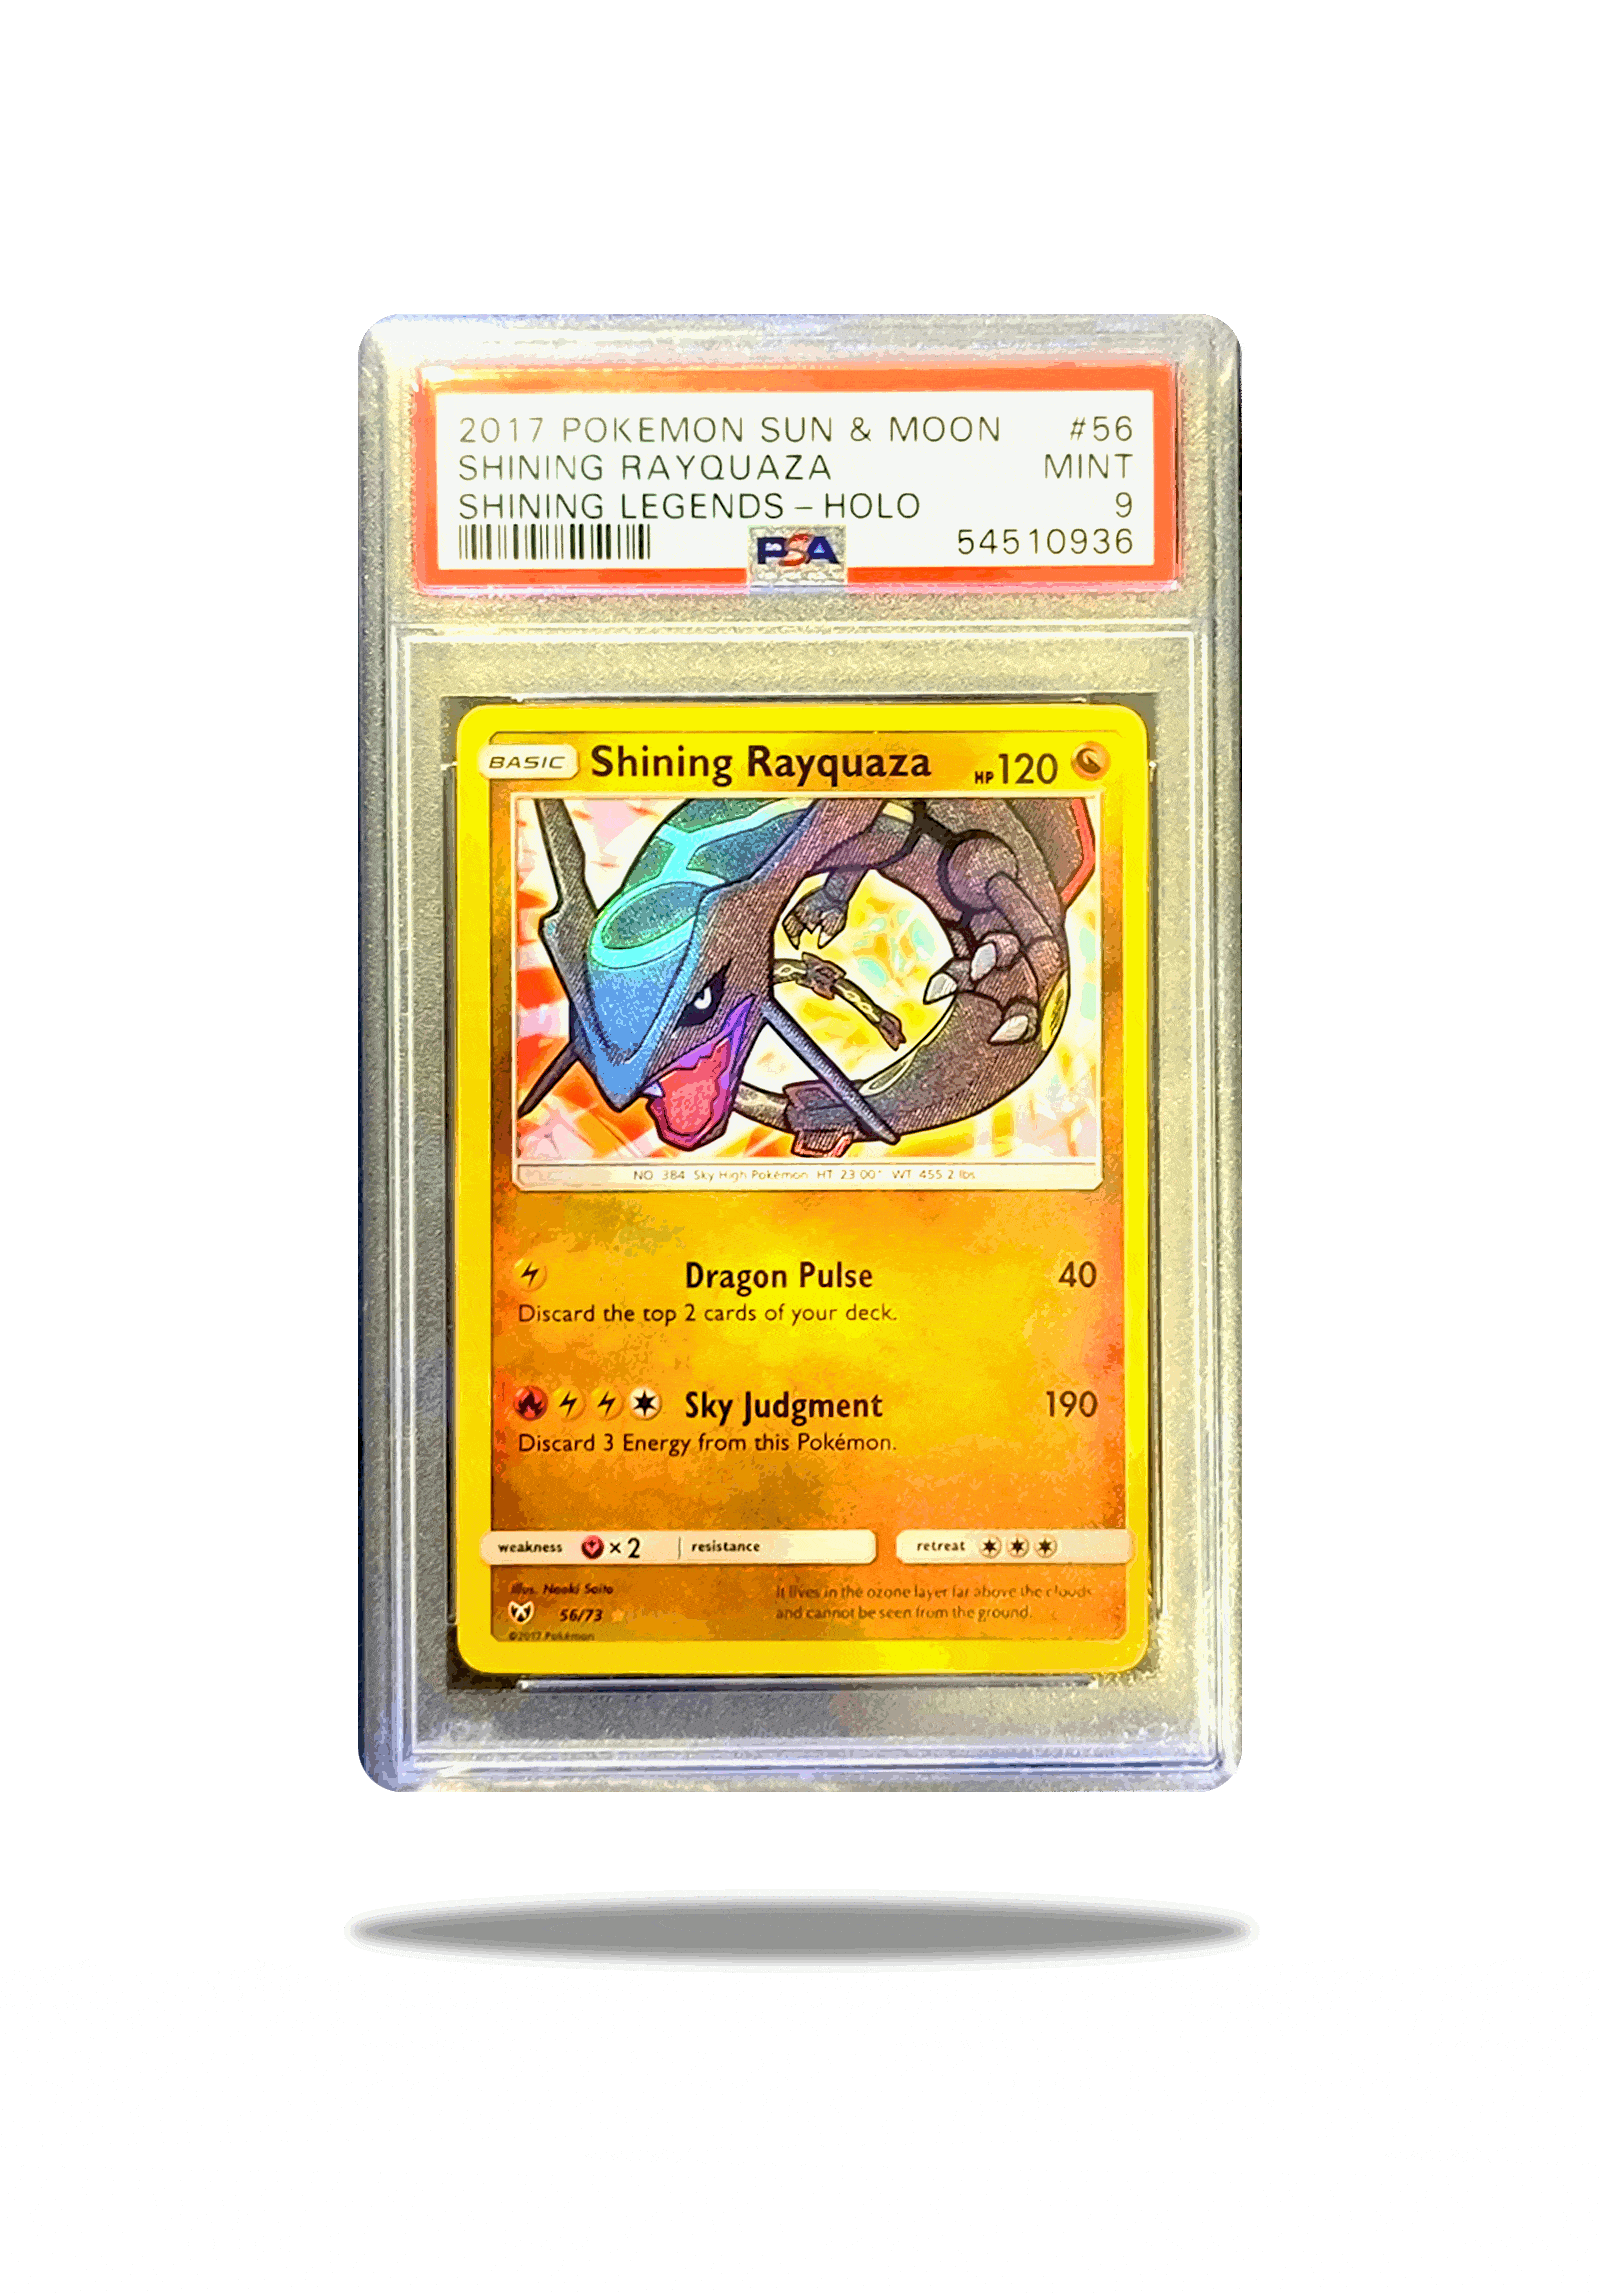 Front of: Shining Rayquaza 56/73 Pokémon Card: A Radiant Force of Legendary Power - 2017 Shining Legends - PSA 9